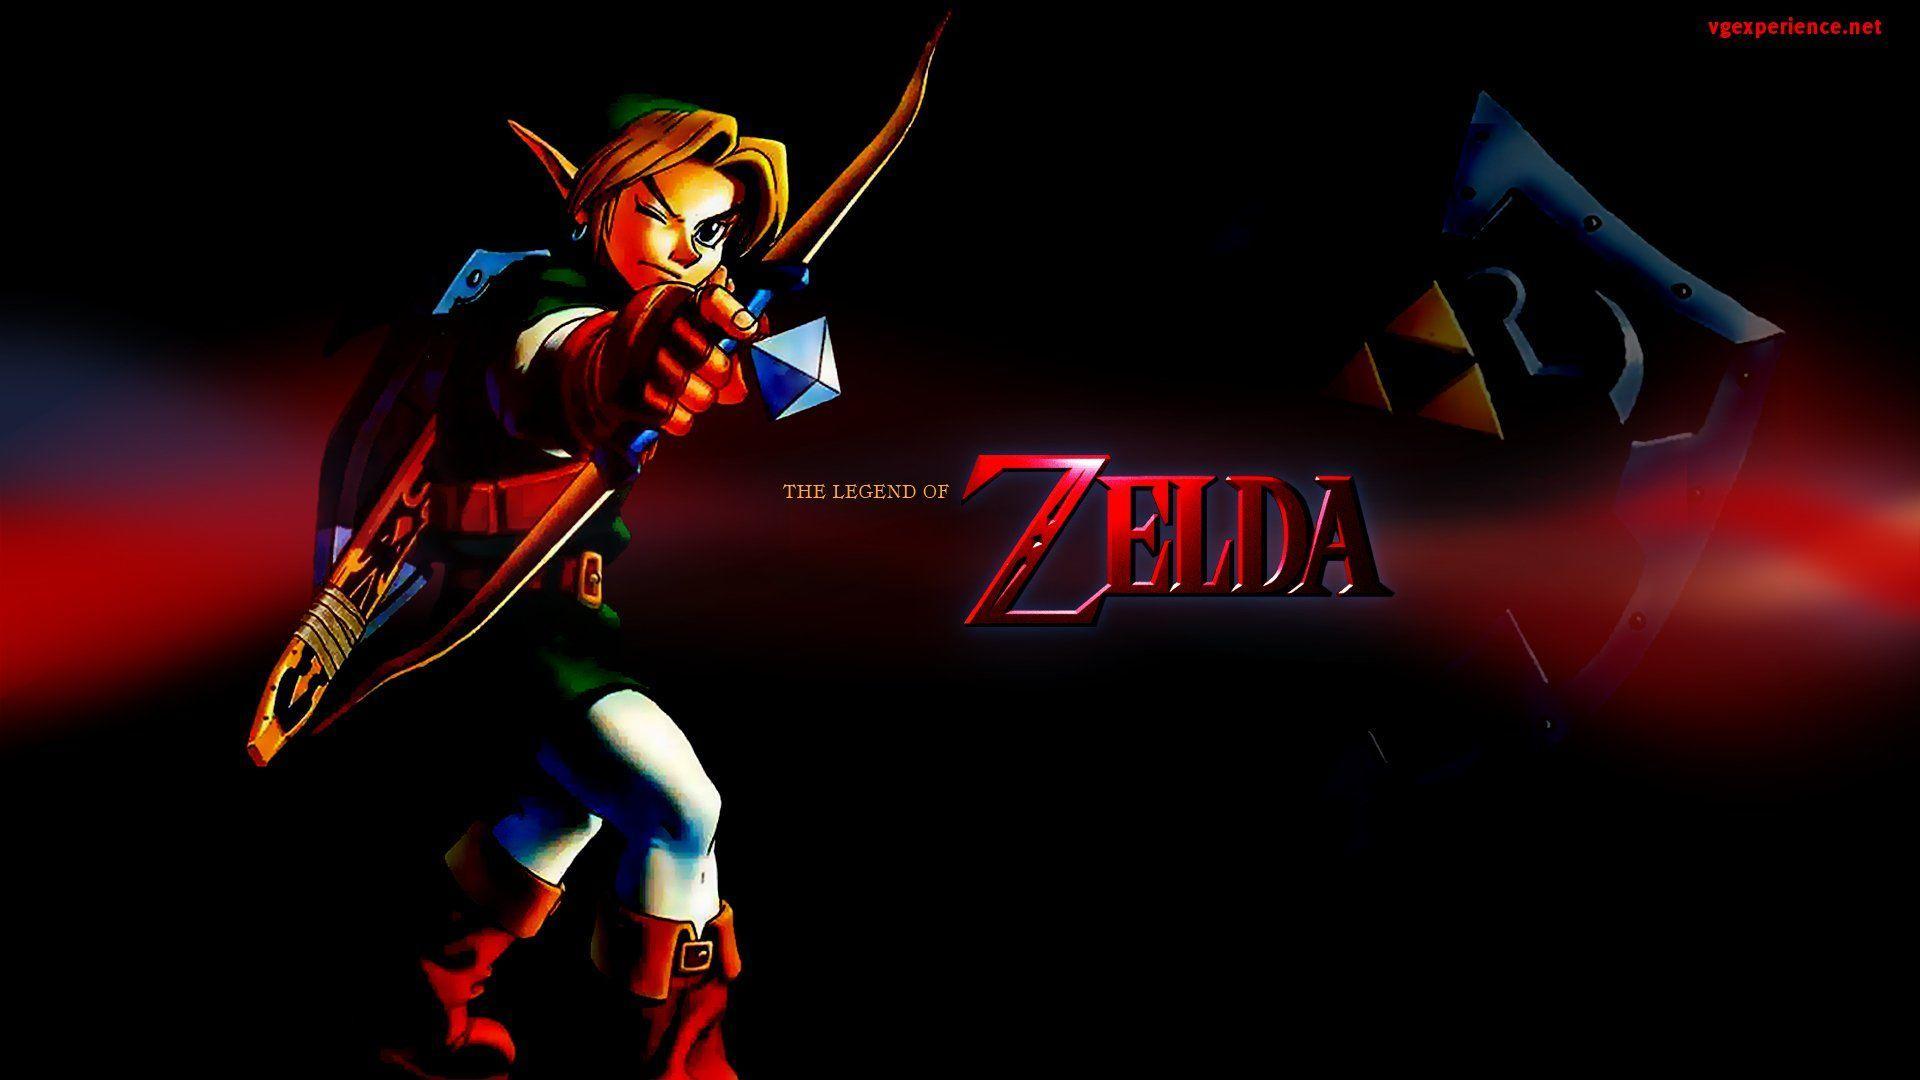 The Legend Of Zelda Ocarina Of Time Wallpaper For Pc